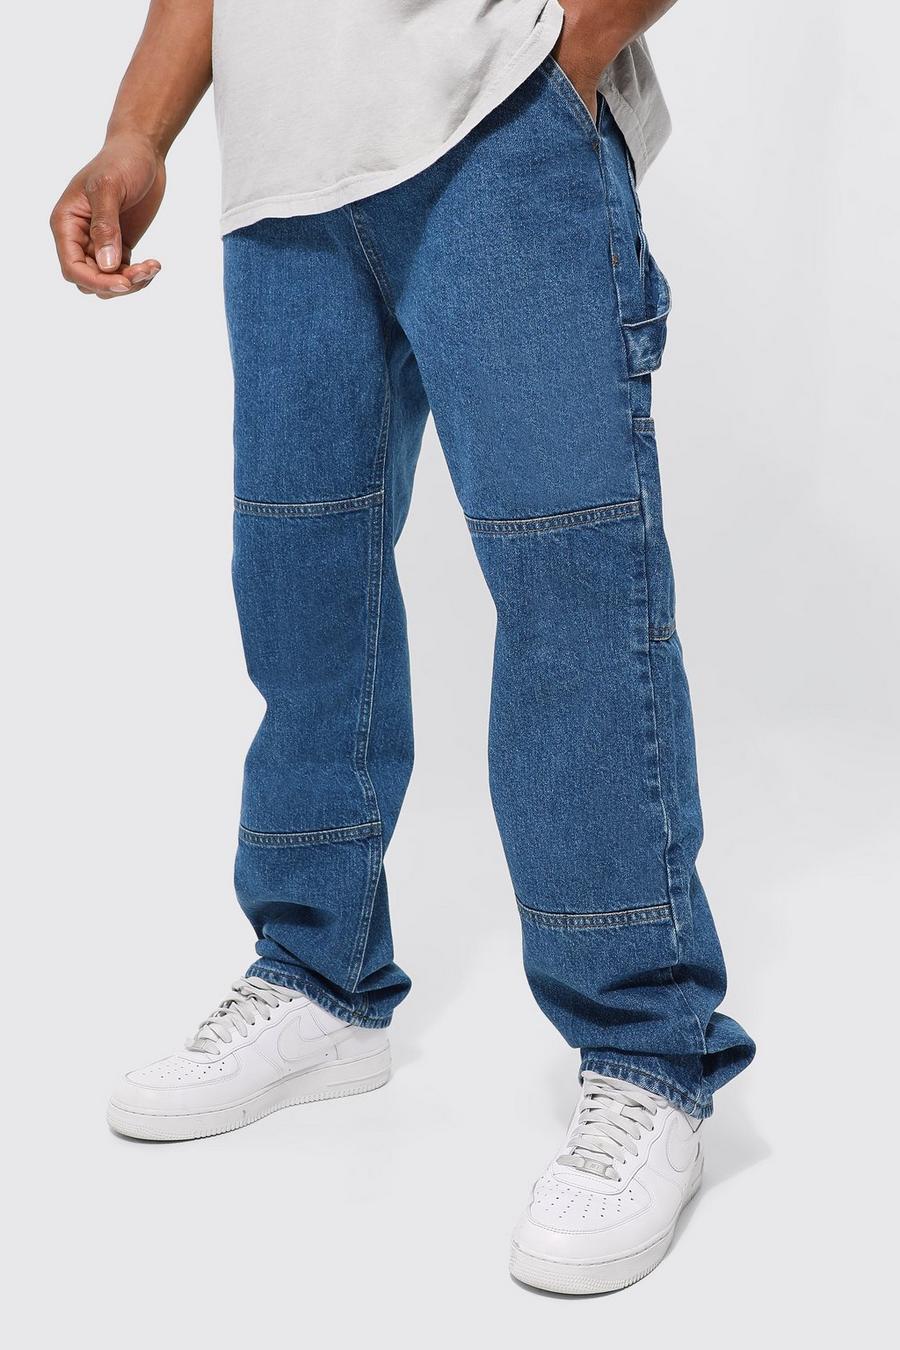 Dickies Men's Relaxed-Fit Carpenter Jean  Guys clothing styles, Jeans  outfit men, Pants outfit men